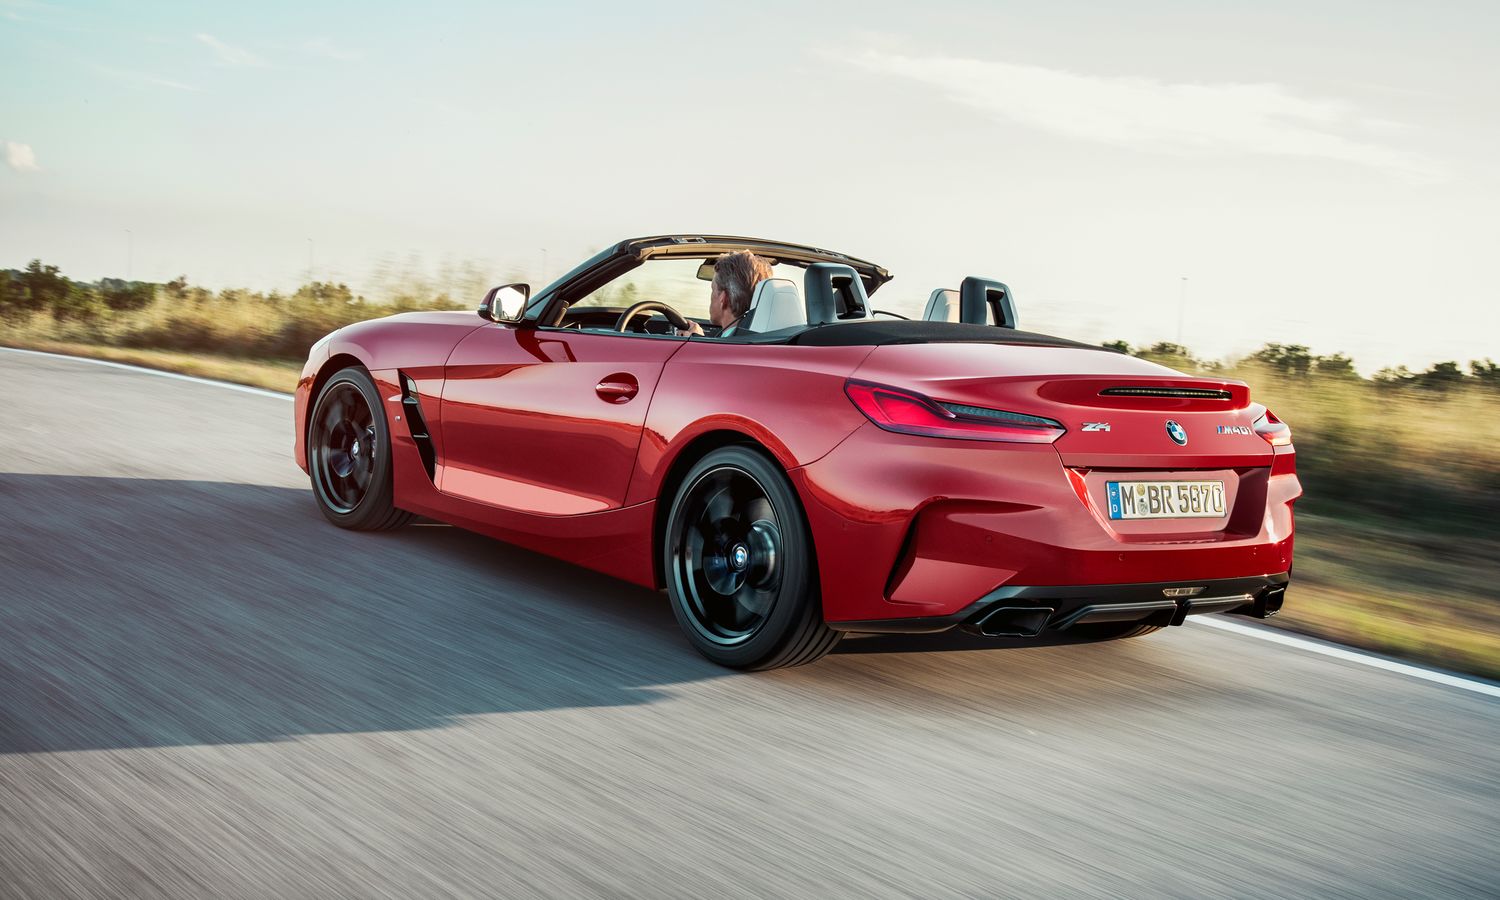 The sporty jaunty Z4 roadster will be the hottest new sports car of 2018.